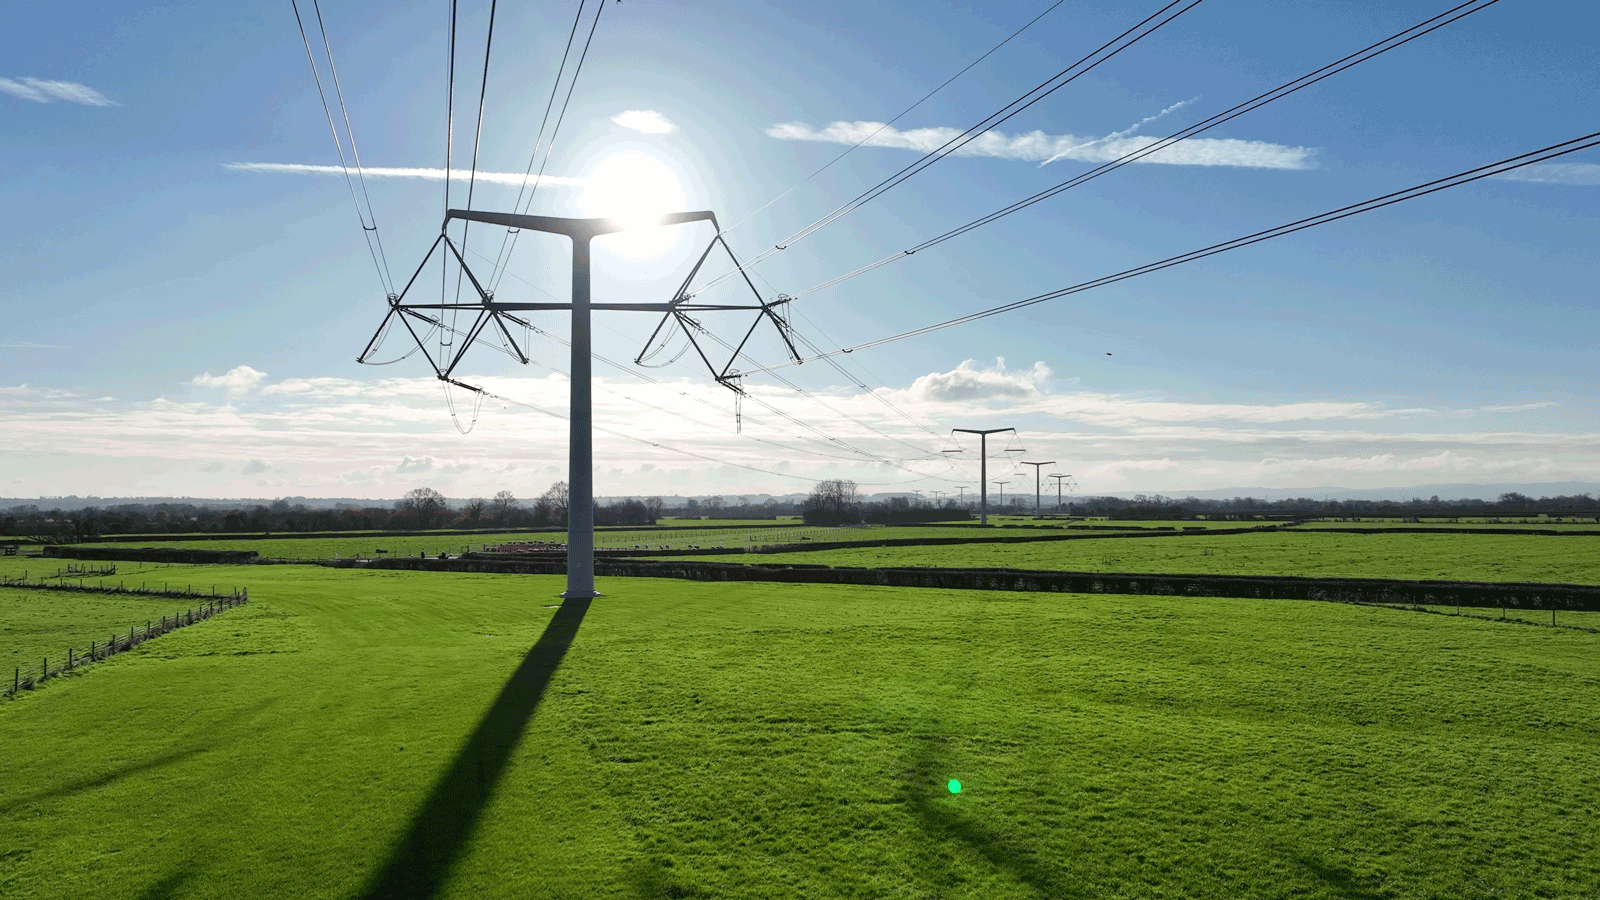 Wiring finishes on 57km of T-pylons to connect Hinkley Point C to the grid